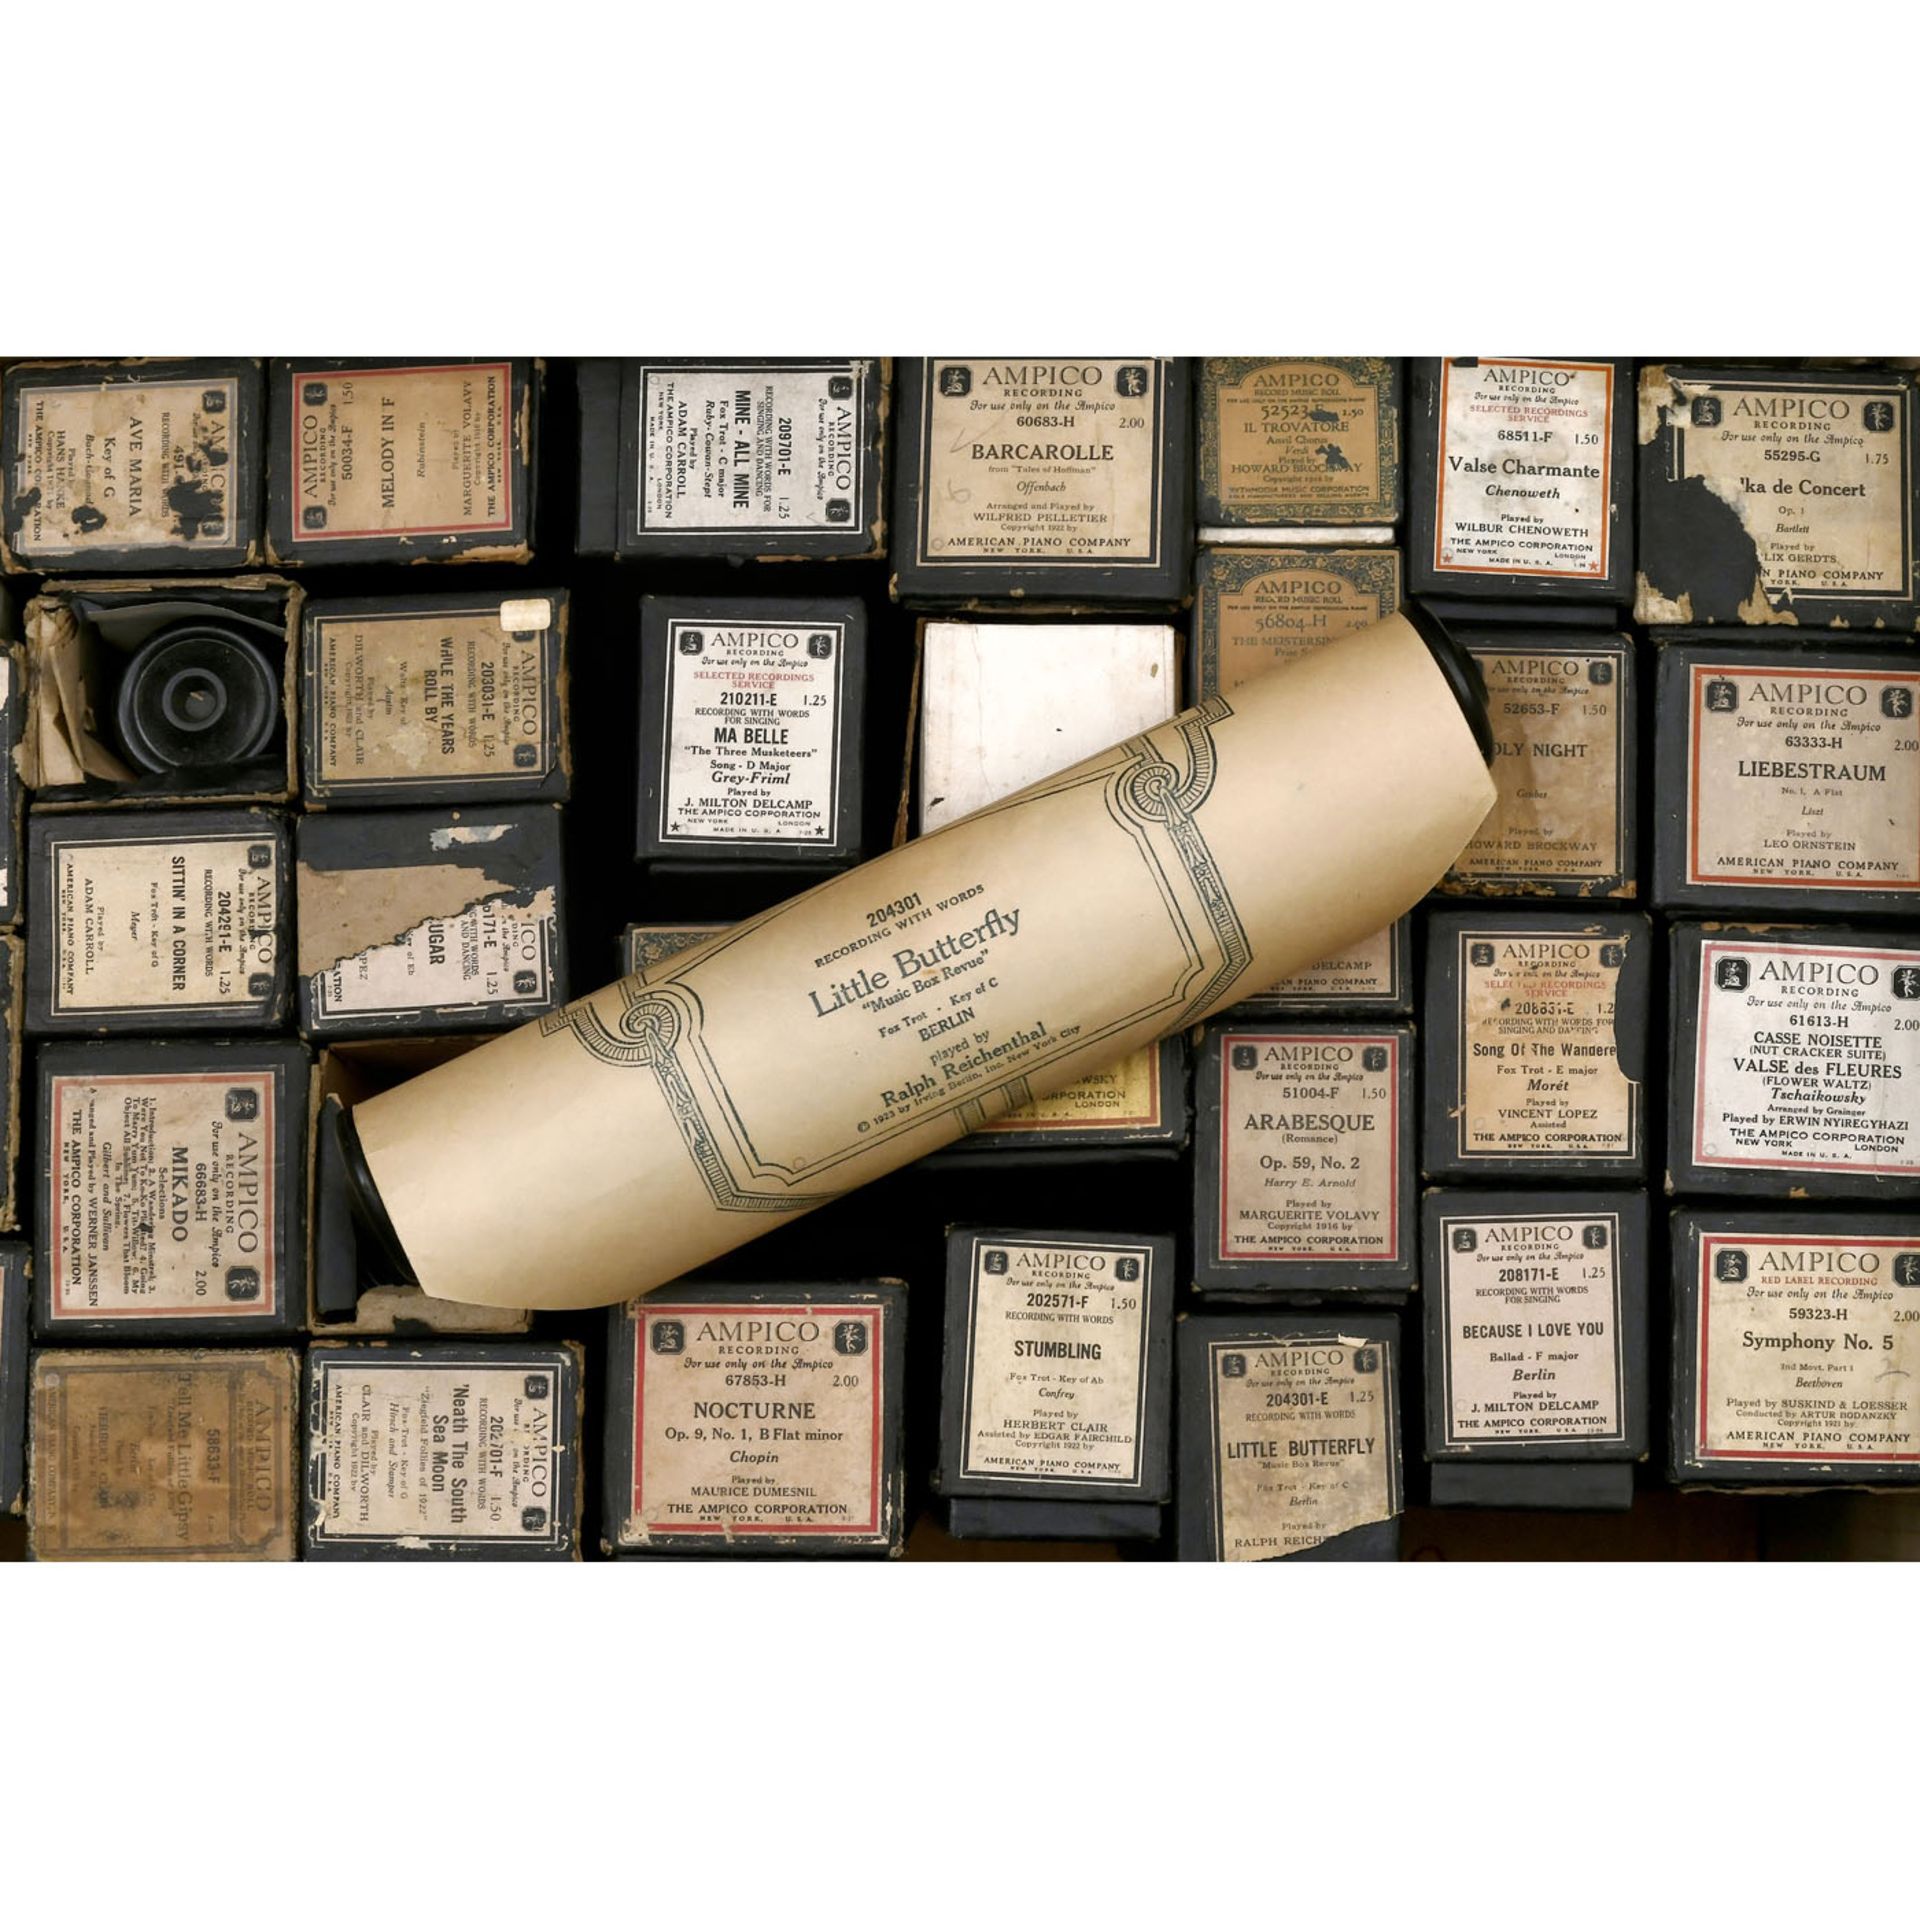 Lot of 233 Ampico Player Piano Rolls - Image 3 of 3